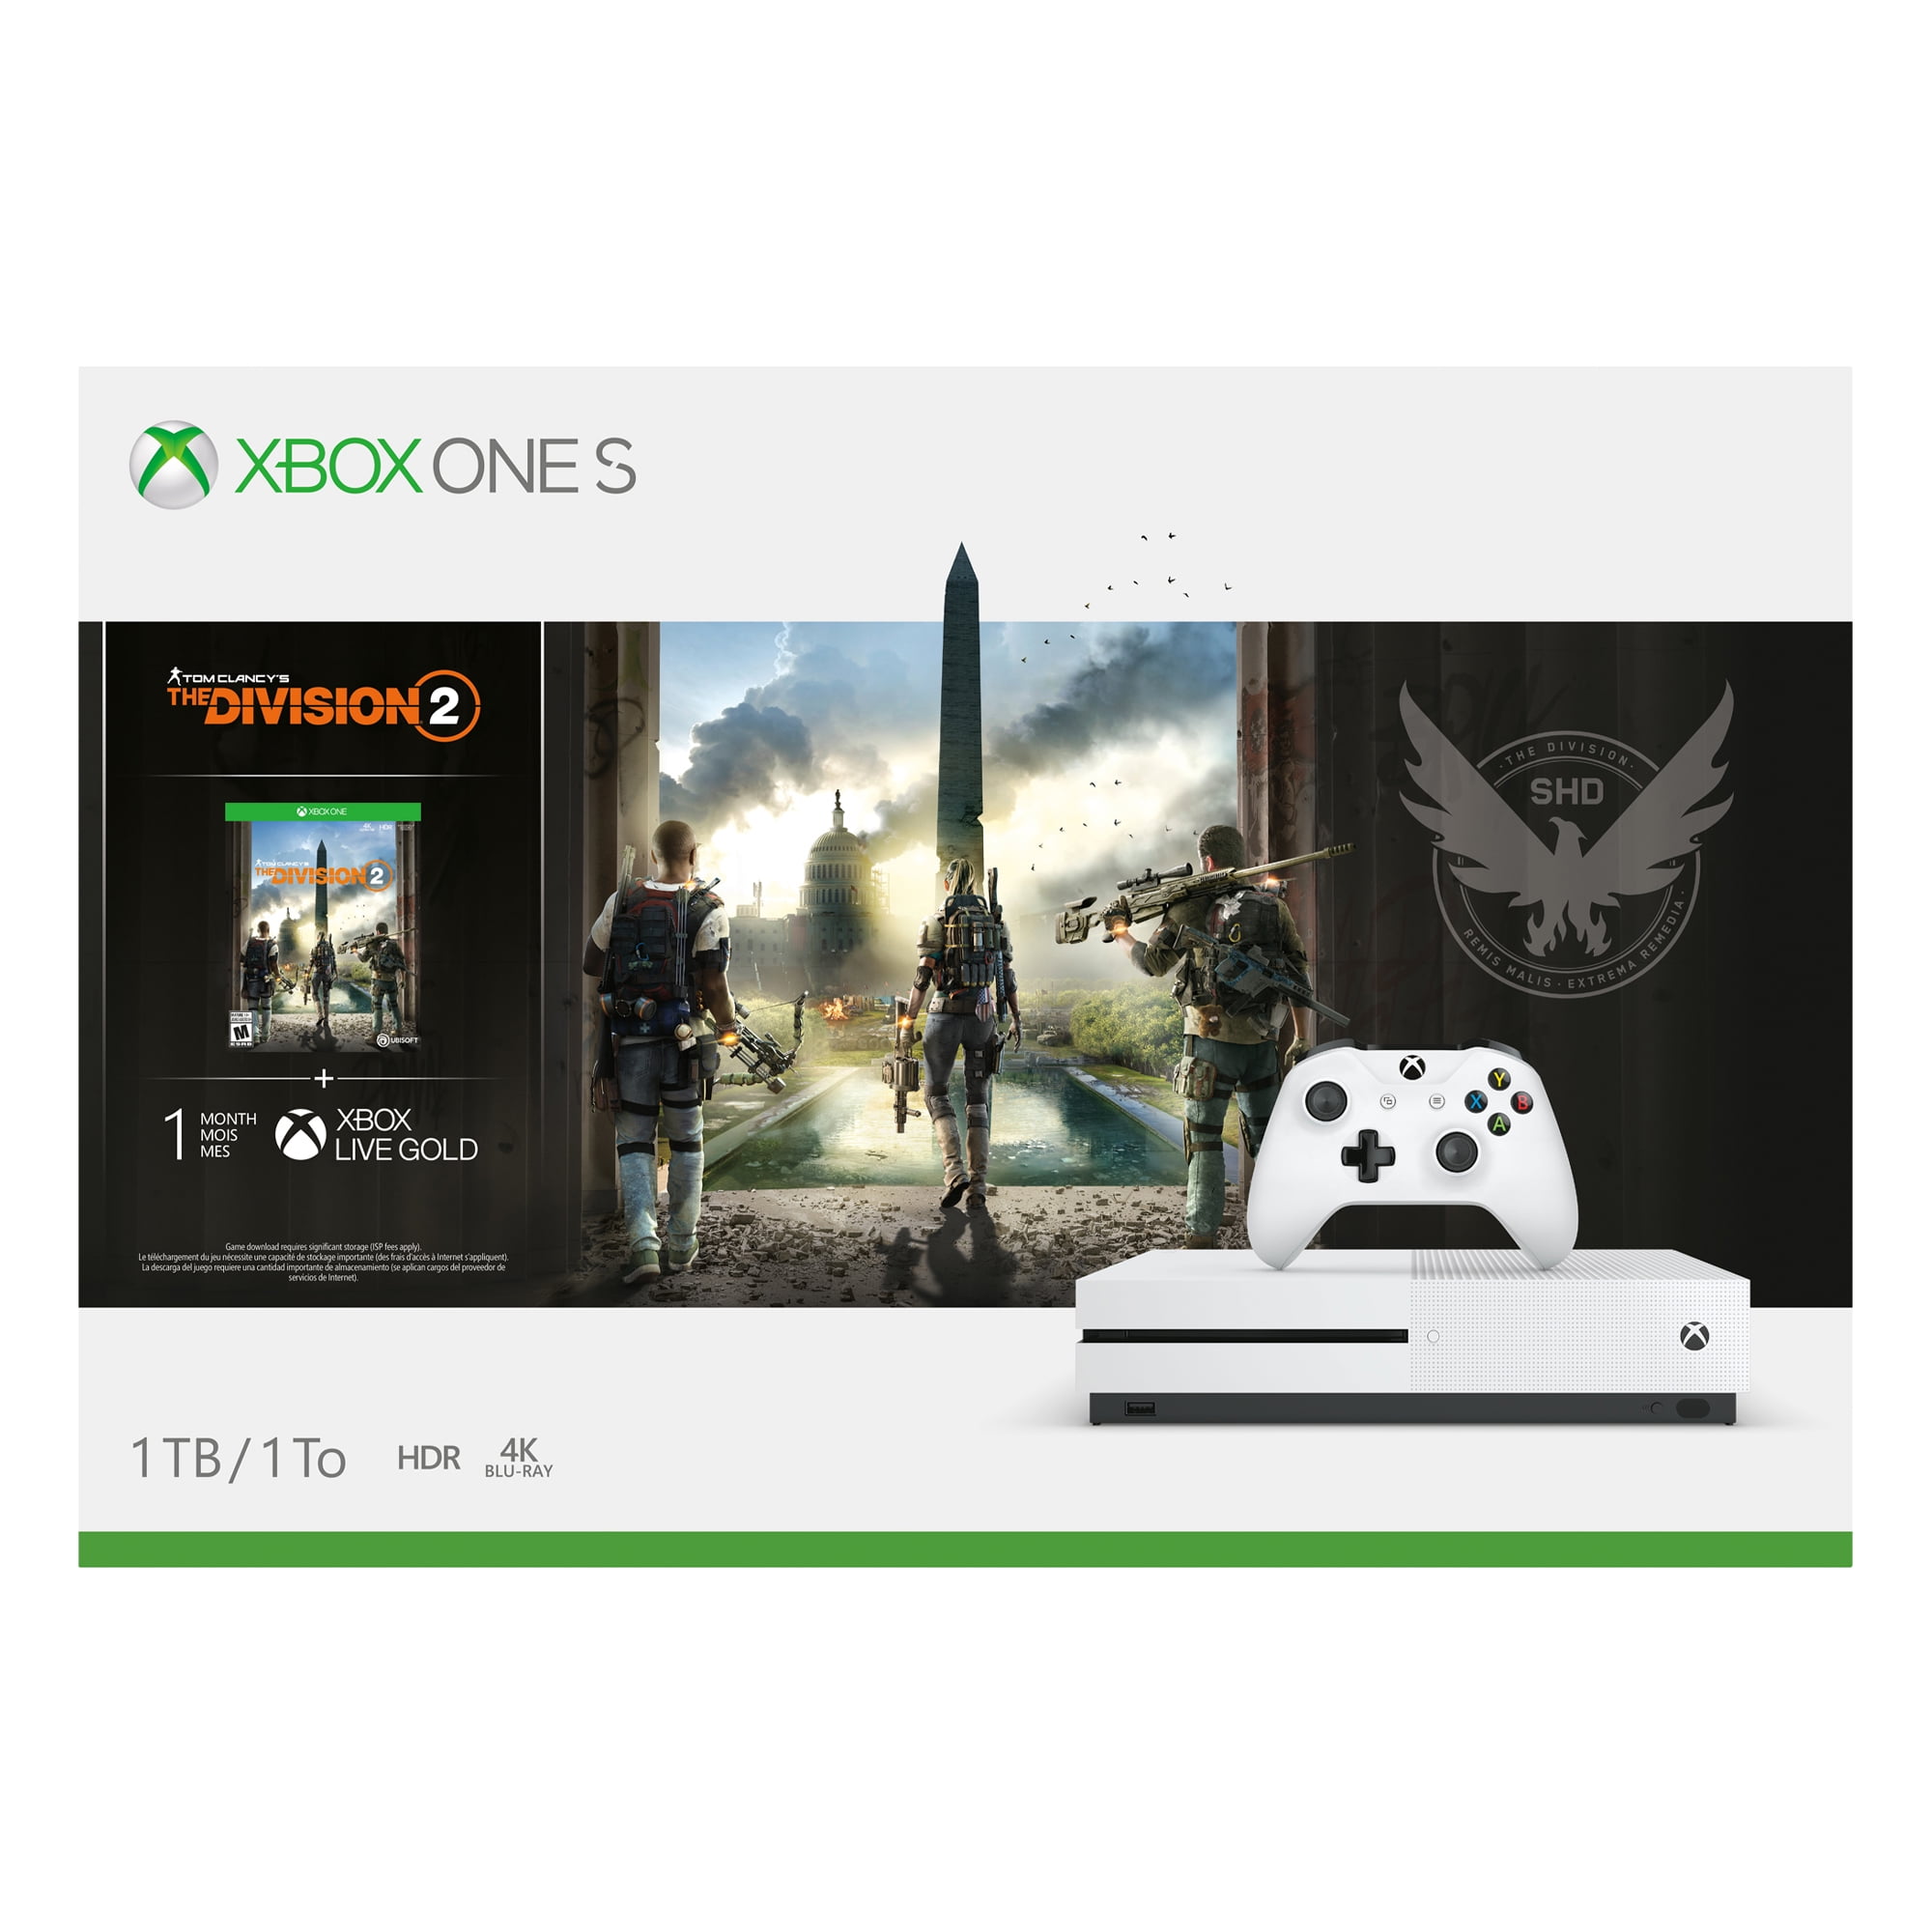 the division 2 xbox one